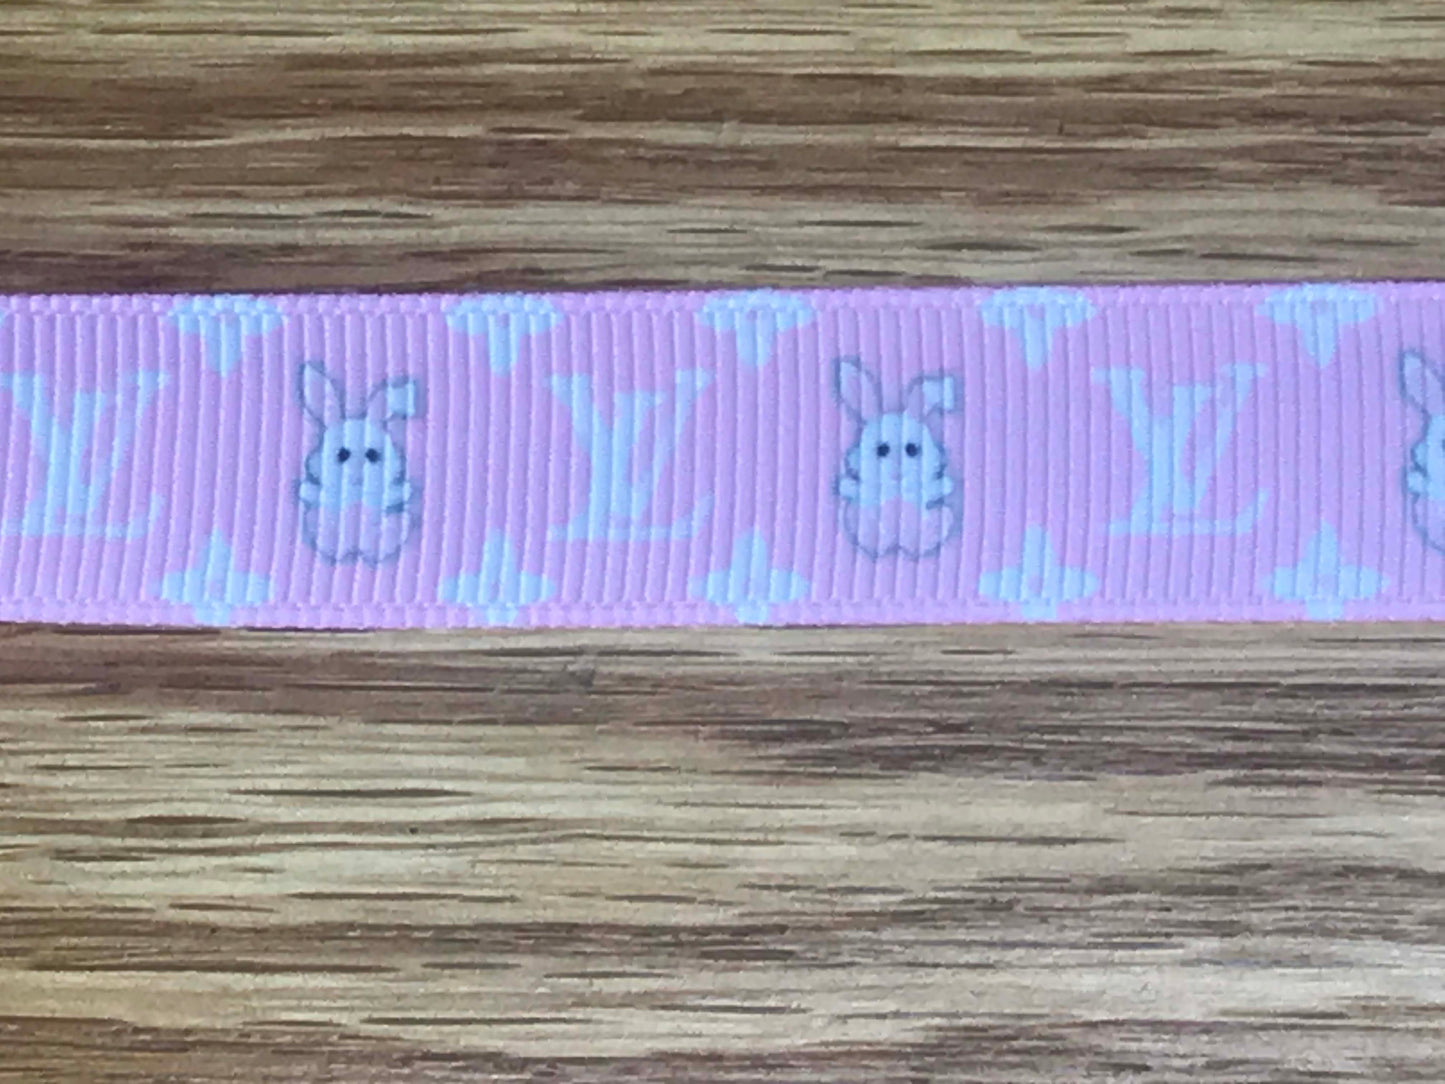 5/8" Wide Famous Designer LV Louis Vuitton Logo With Easter Bunny Rabbits On Pink Grosgrain Ribbon